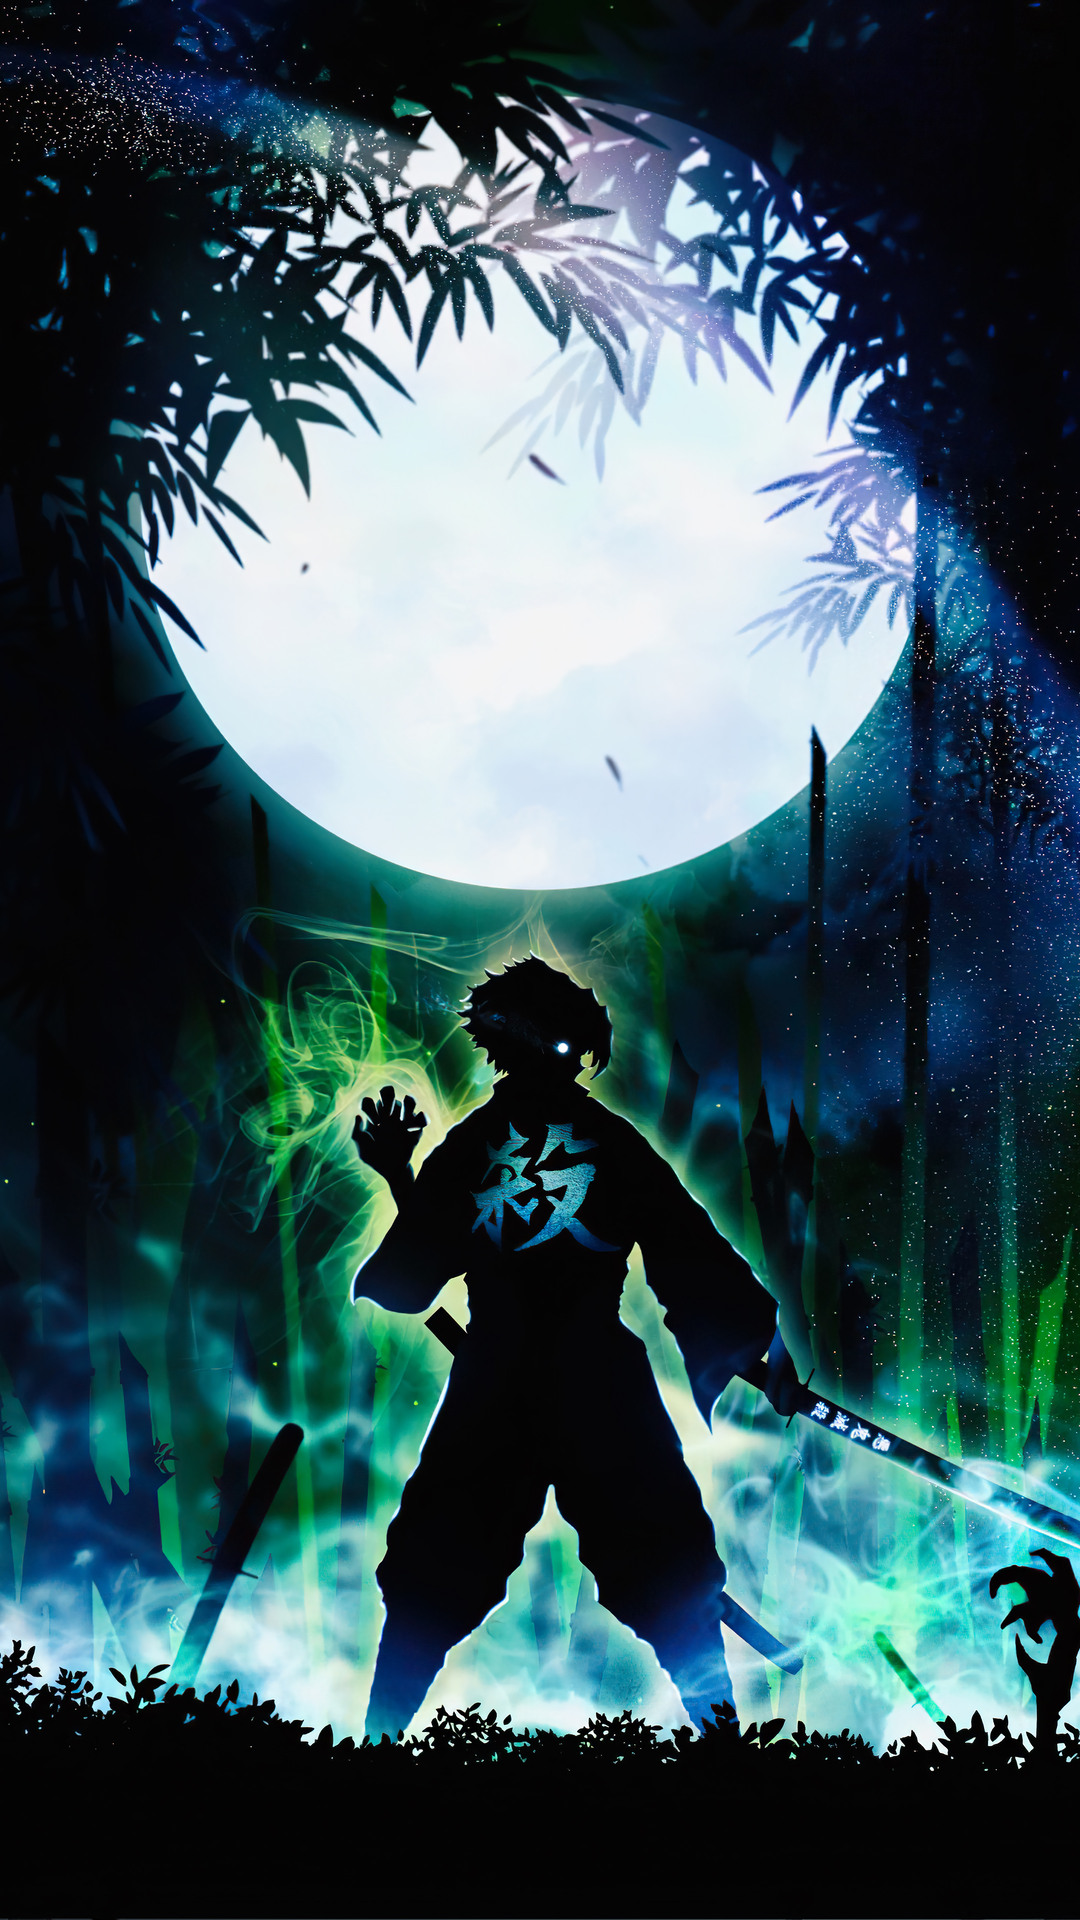 A man with swords in the moonlight - Demon Slayer